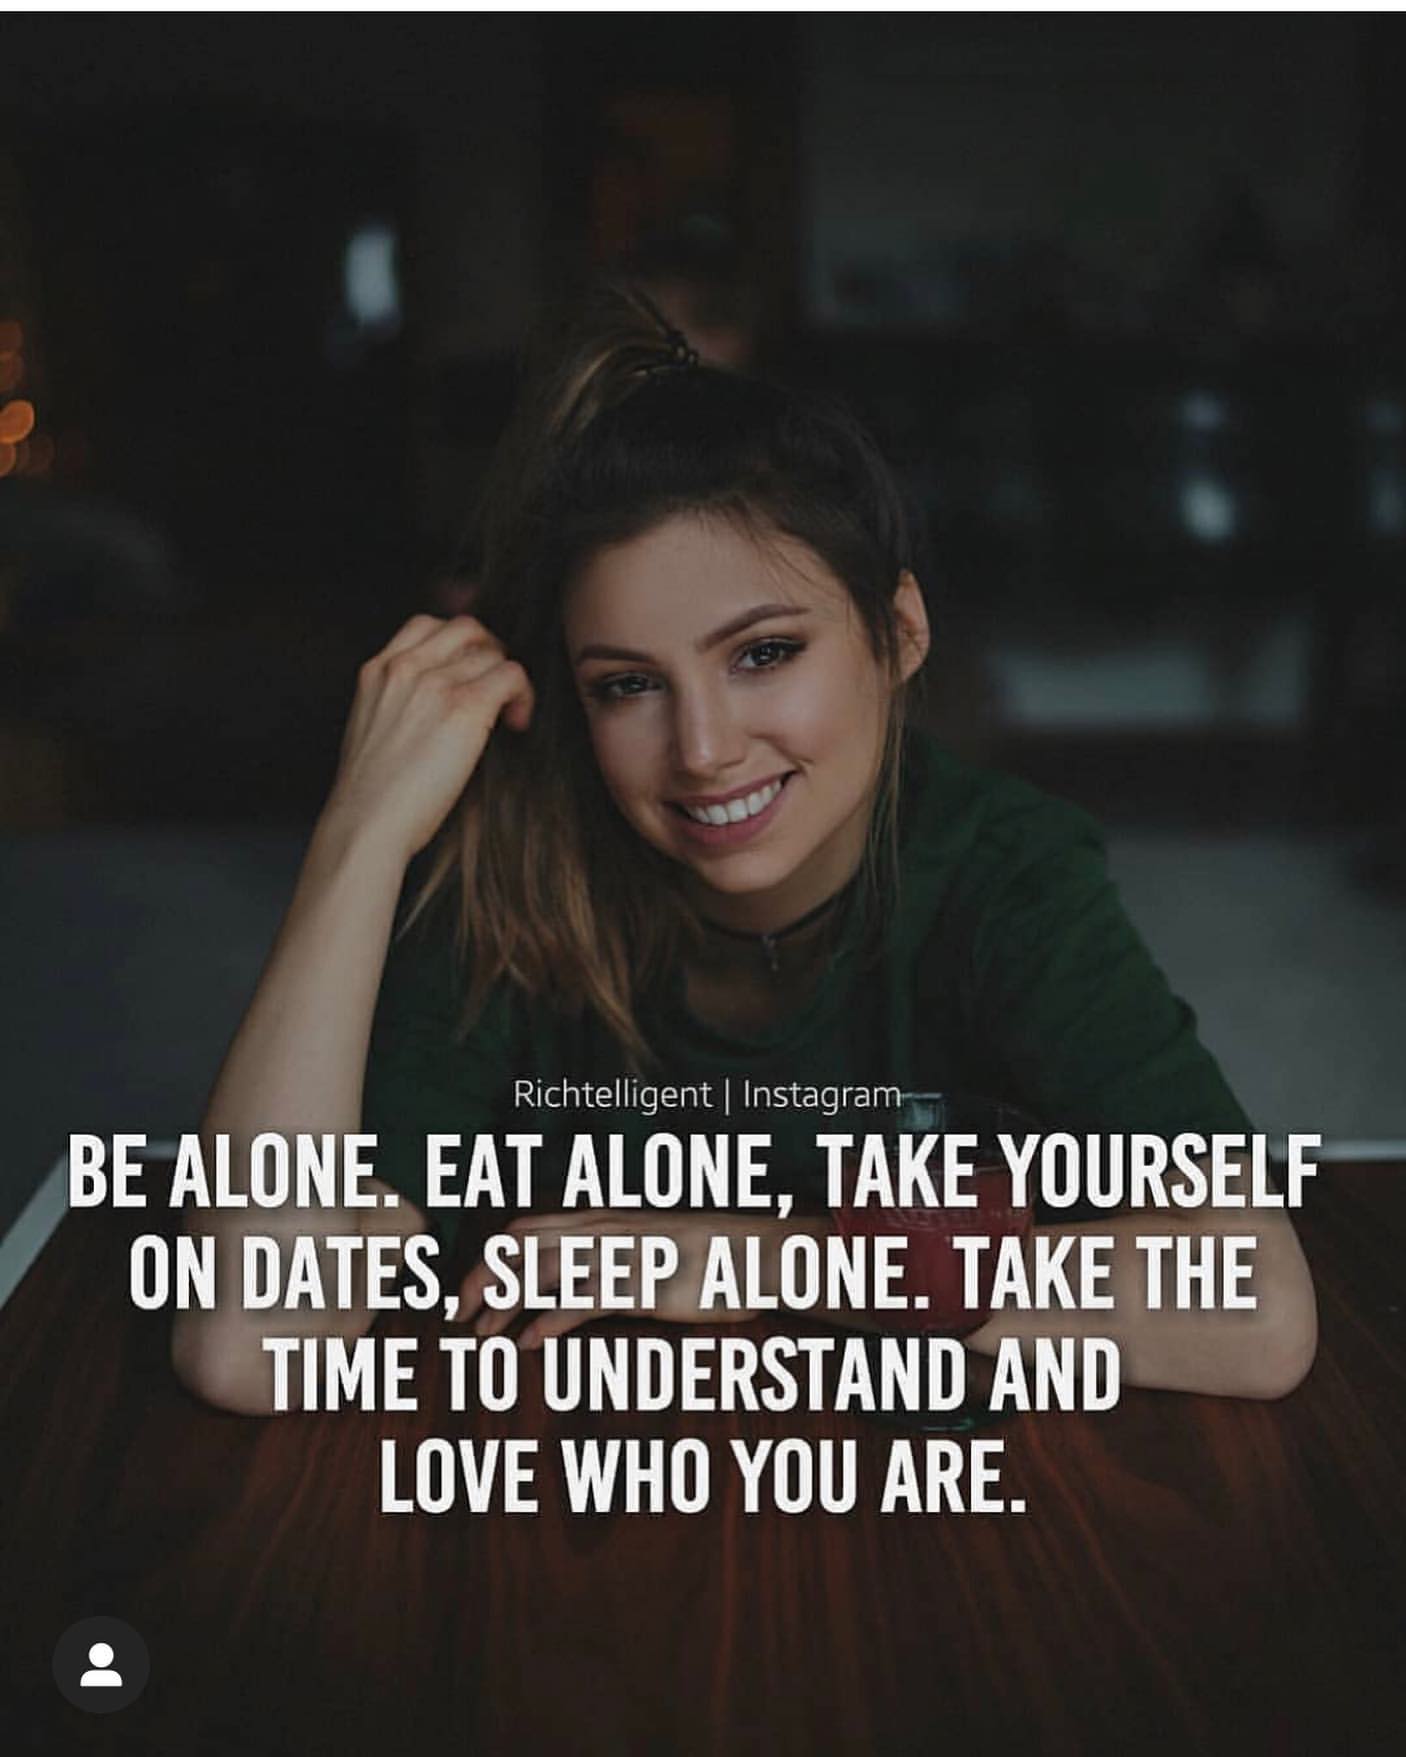 Be alone. Eat alone. Take yourself on dates, sleep alone. Take the time to understand and love who you are.